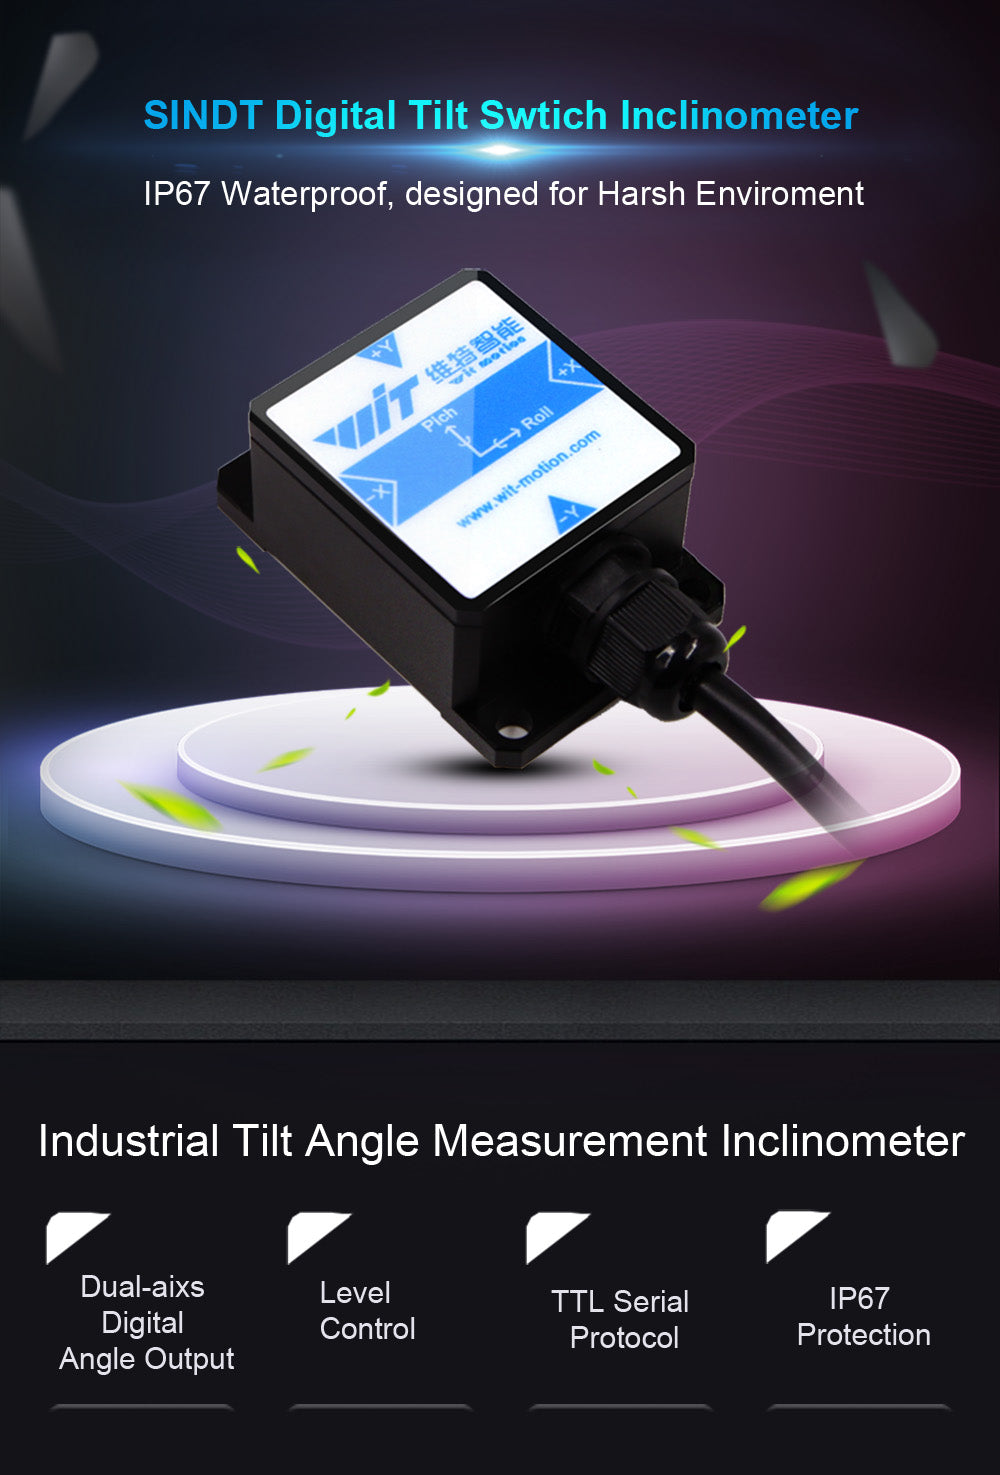 【SINDT-485 Modbus Accelerometer】High-Accuracy 200Hz MPU6050 3-Axis Acceleration+Gyro+Quaternion+2-Axis Angle(XY 0.05° Accuracy), IP67 Waterproof Tilt Sensor for Constructions Monitoring